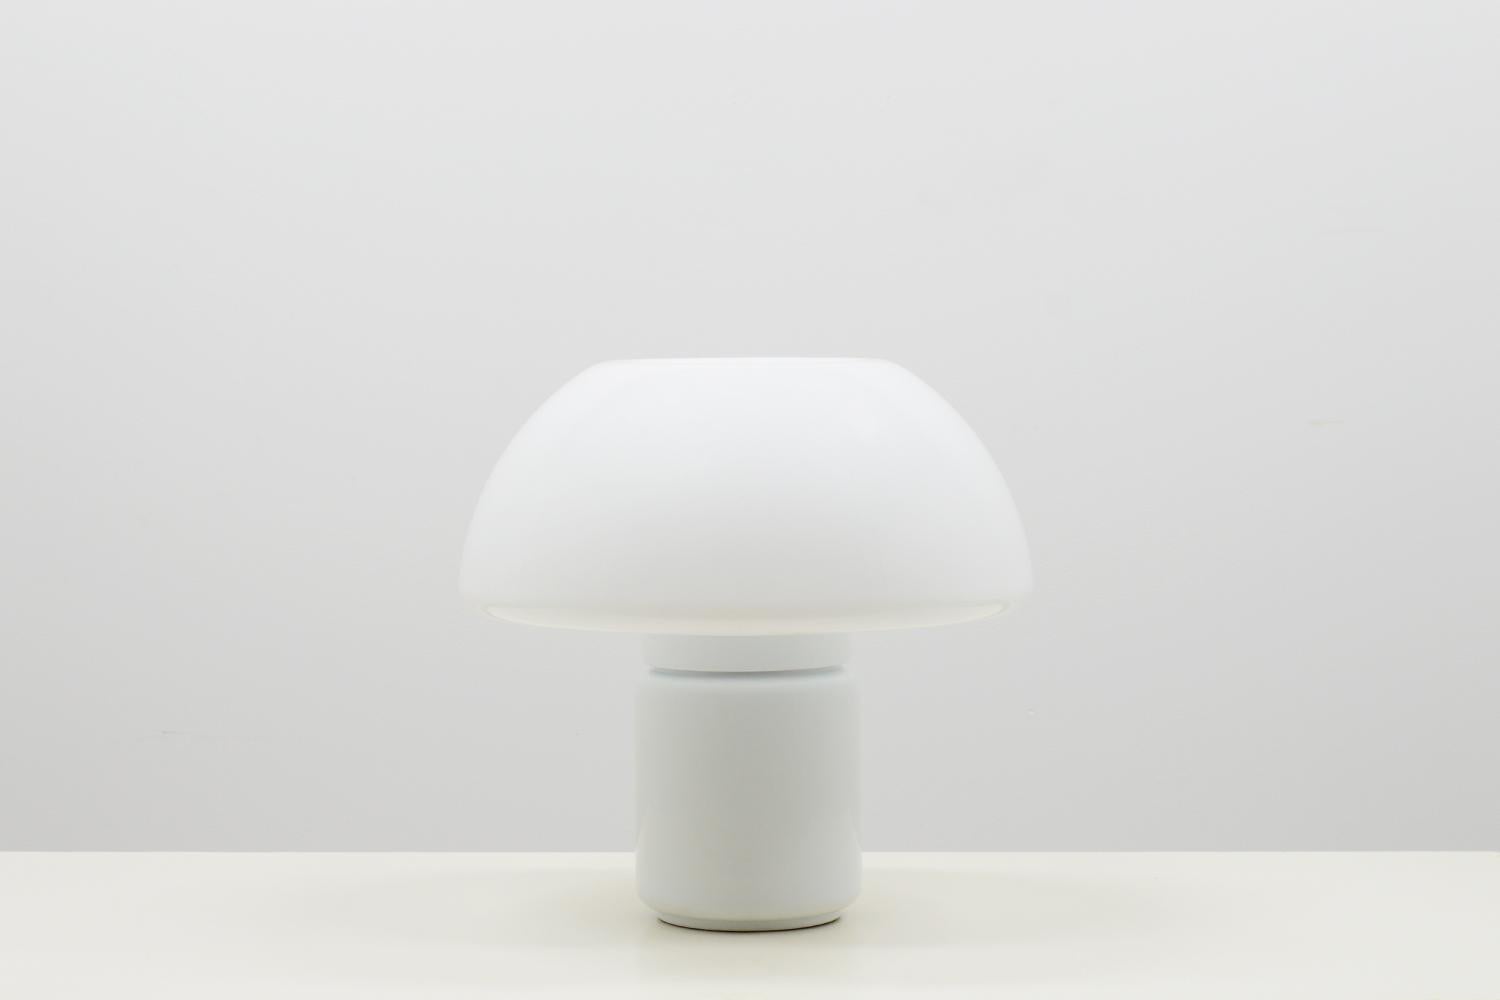 “Mushroom” table lamp 625 by Elio Martilelli for martinelli luce, Italy 70s. Metal white base and acrylic white shade. Holds 3 E27 bulbs. The lamp is rewired (EU plug). A dent on the back of the shade due to a too hot bulb, this does not effect the